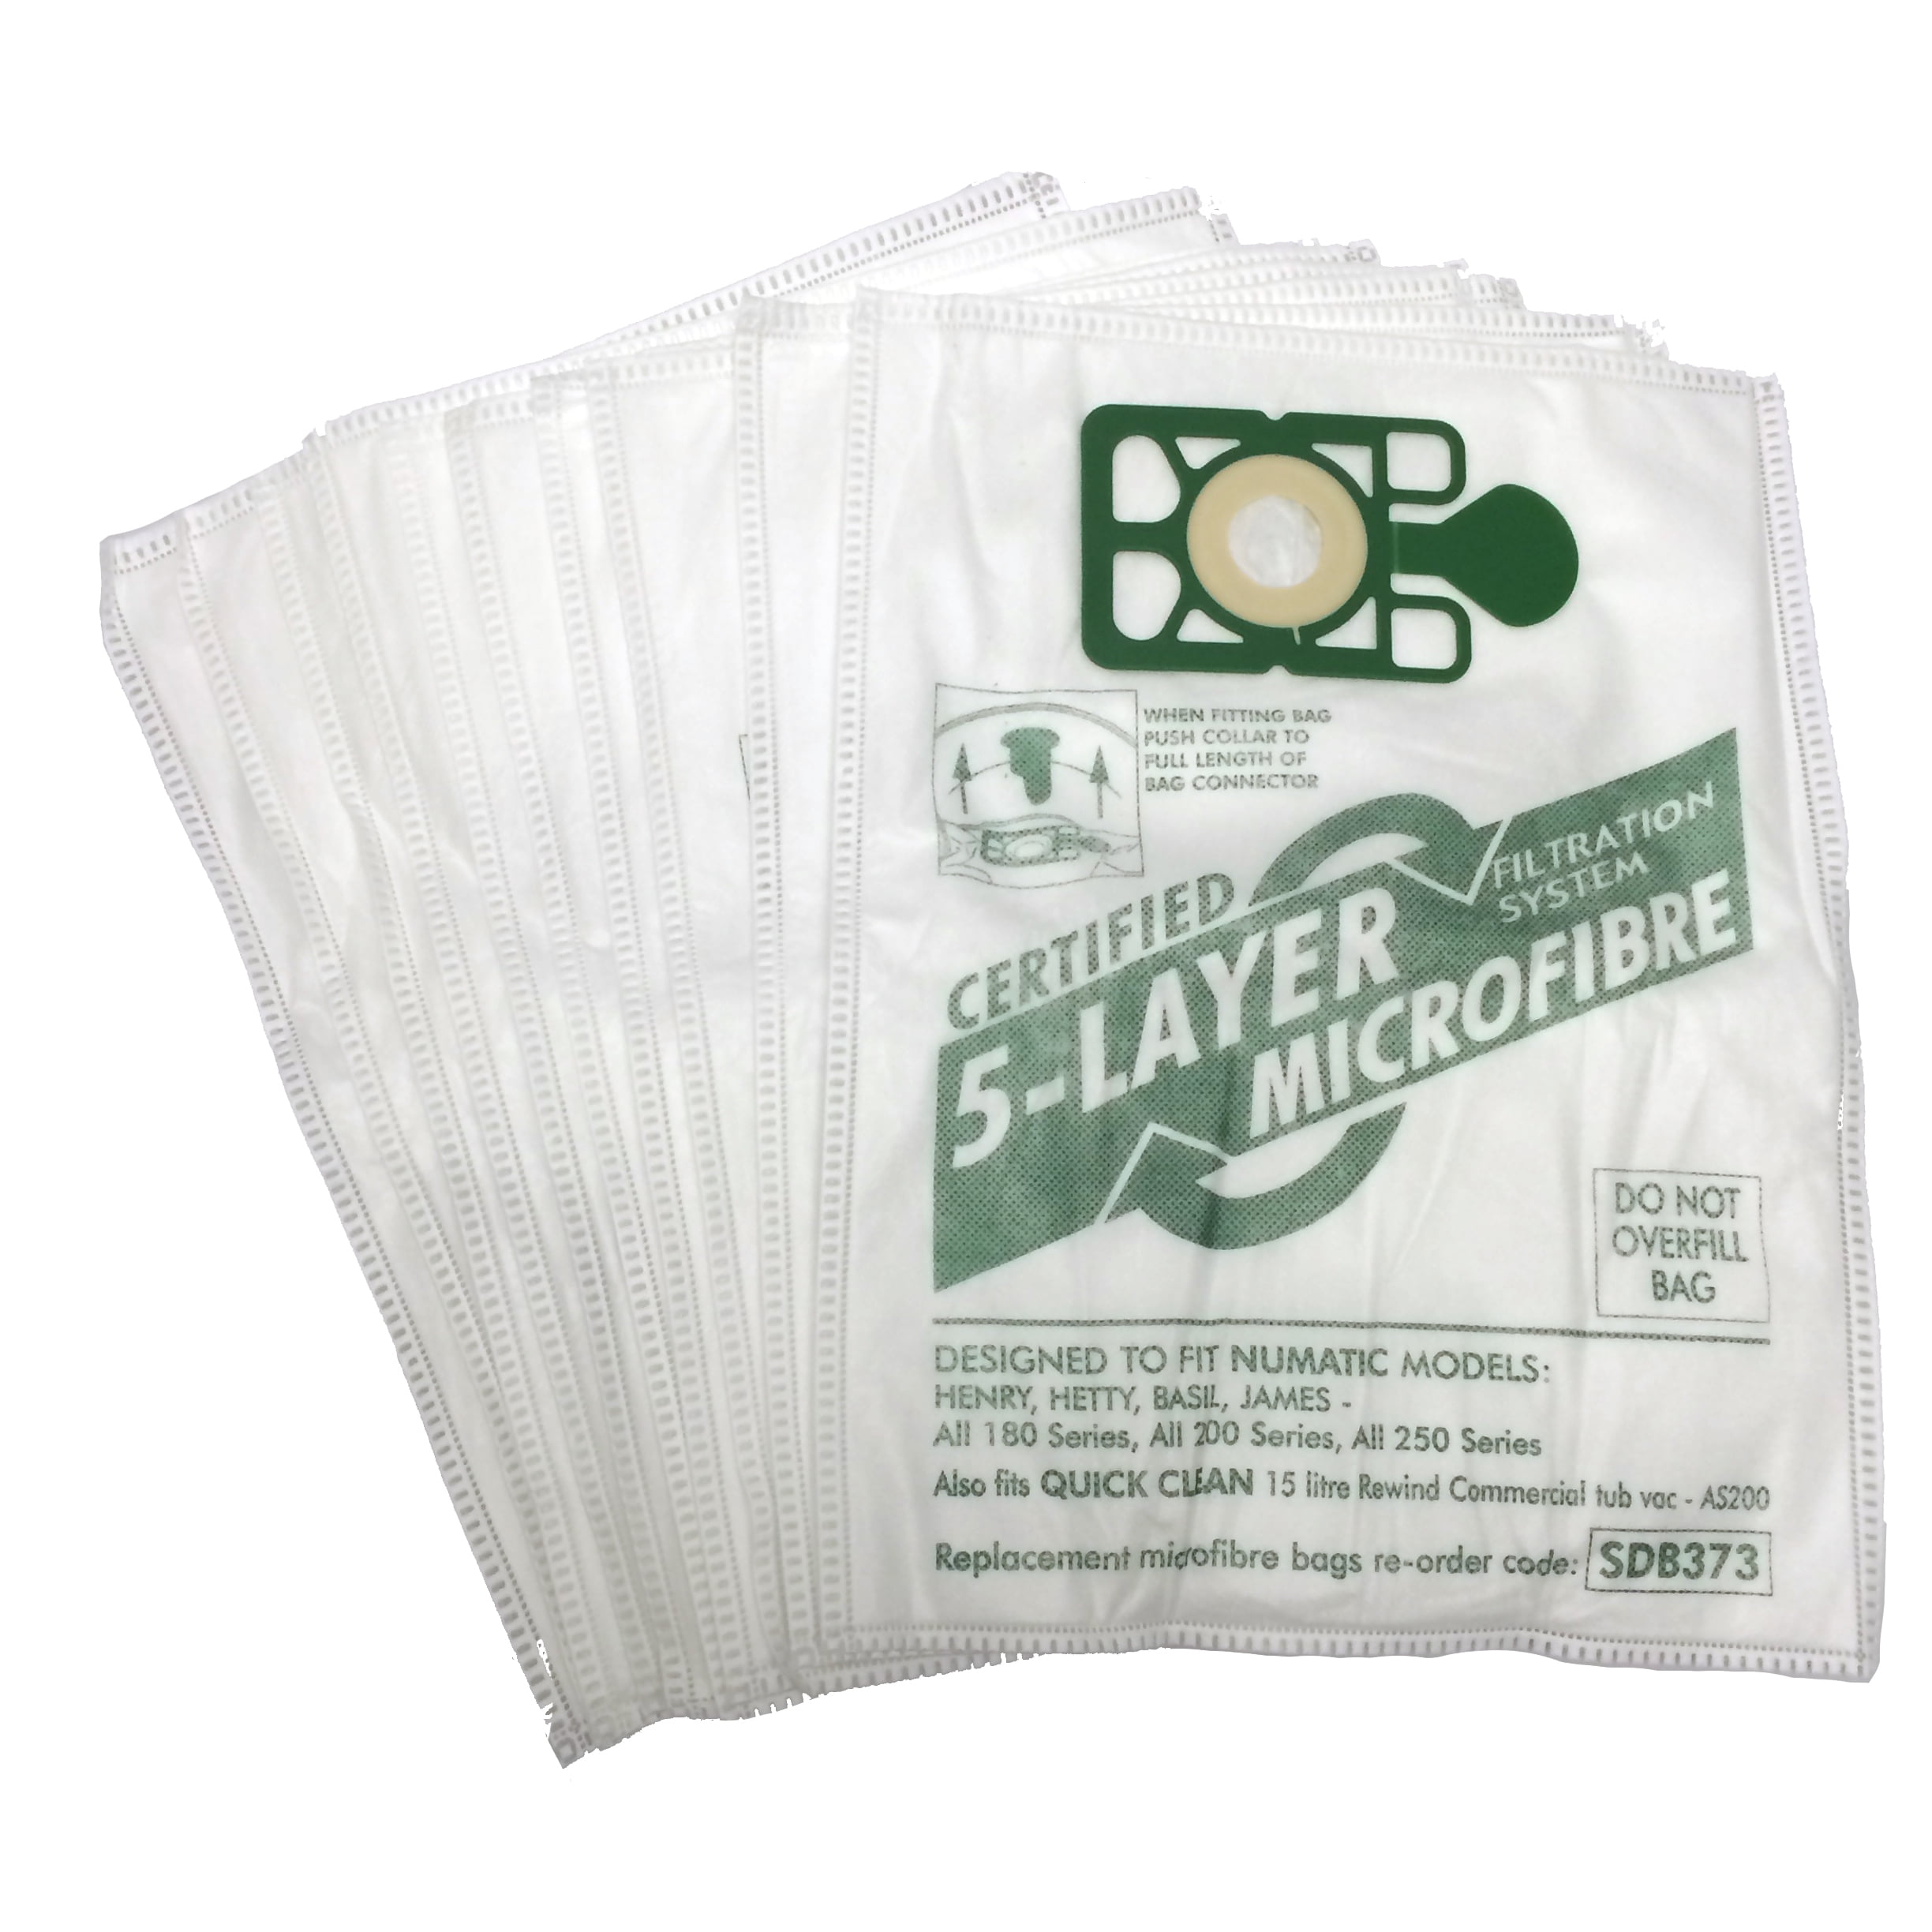 20 Vacuum Cleaner MICROFIBRE Dust Bags For Numatic Henry Basil James Hoover 